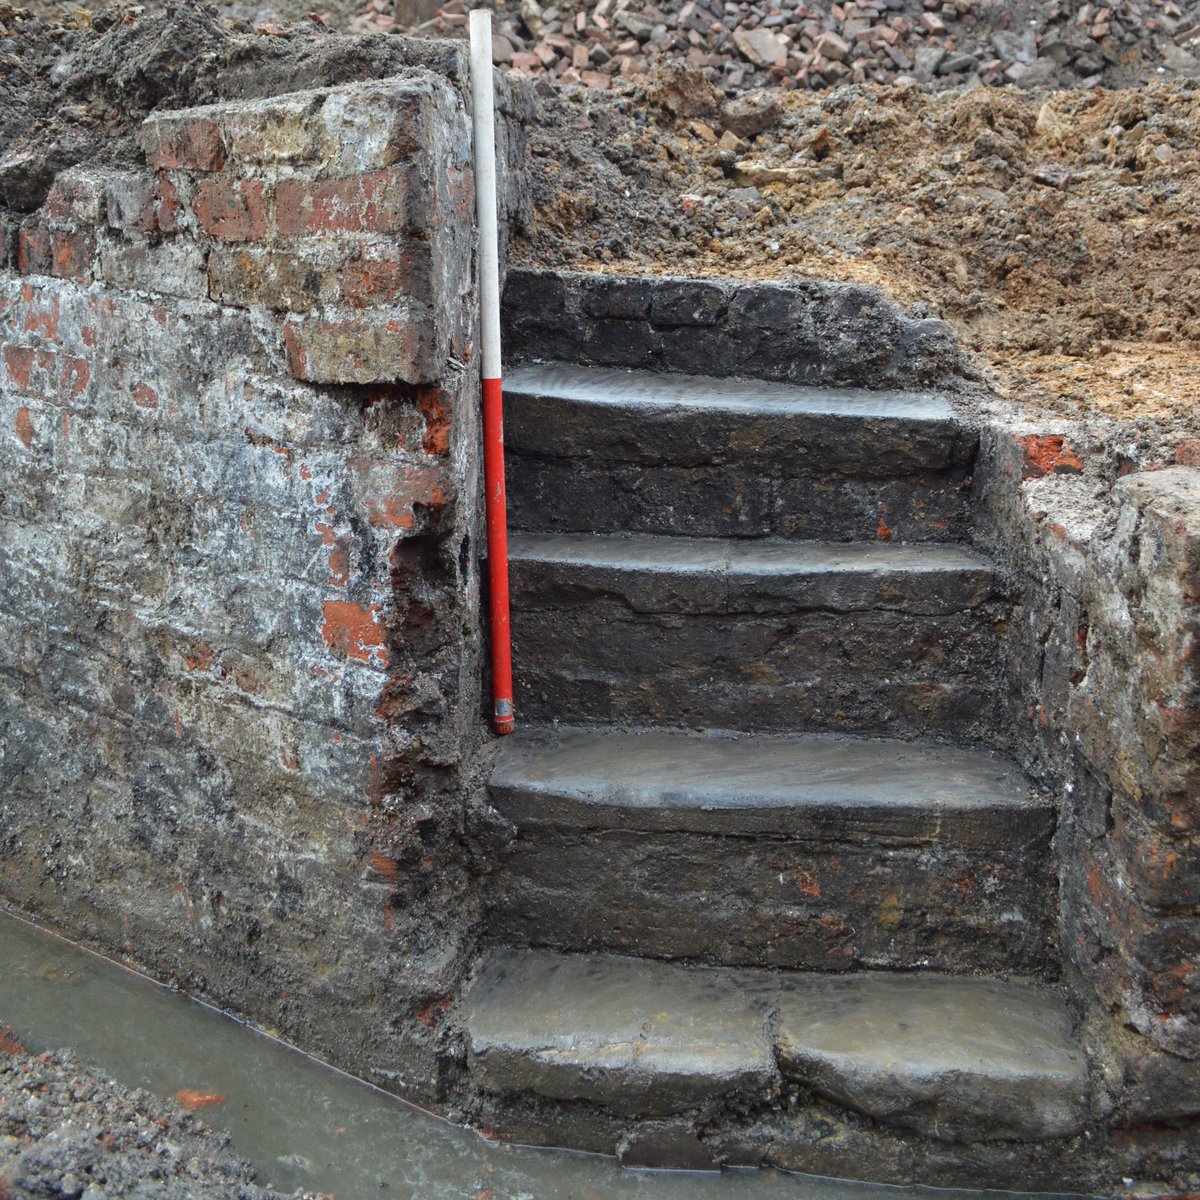 It's incredible to see what's #preserved under the ground! Here, we've got a perfect set of stairs excavated under what had been a modern steel works in #Sheffield. 

#CommercialArchaeology #Yorkshire #YorkshireHistory #IndustrialHistory #Victorian #Victoriana #OneTwoStep